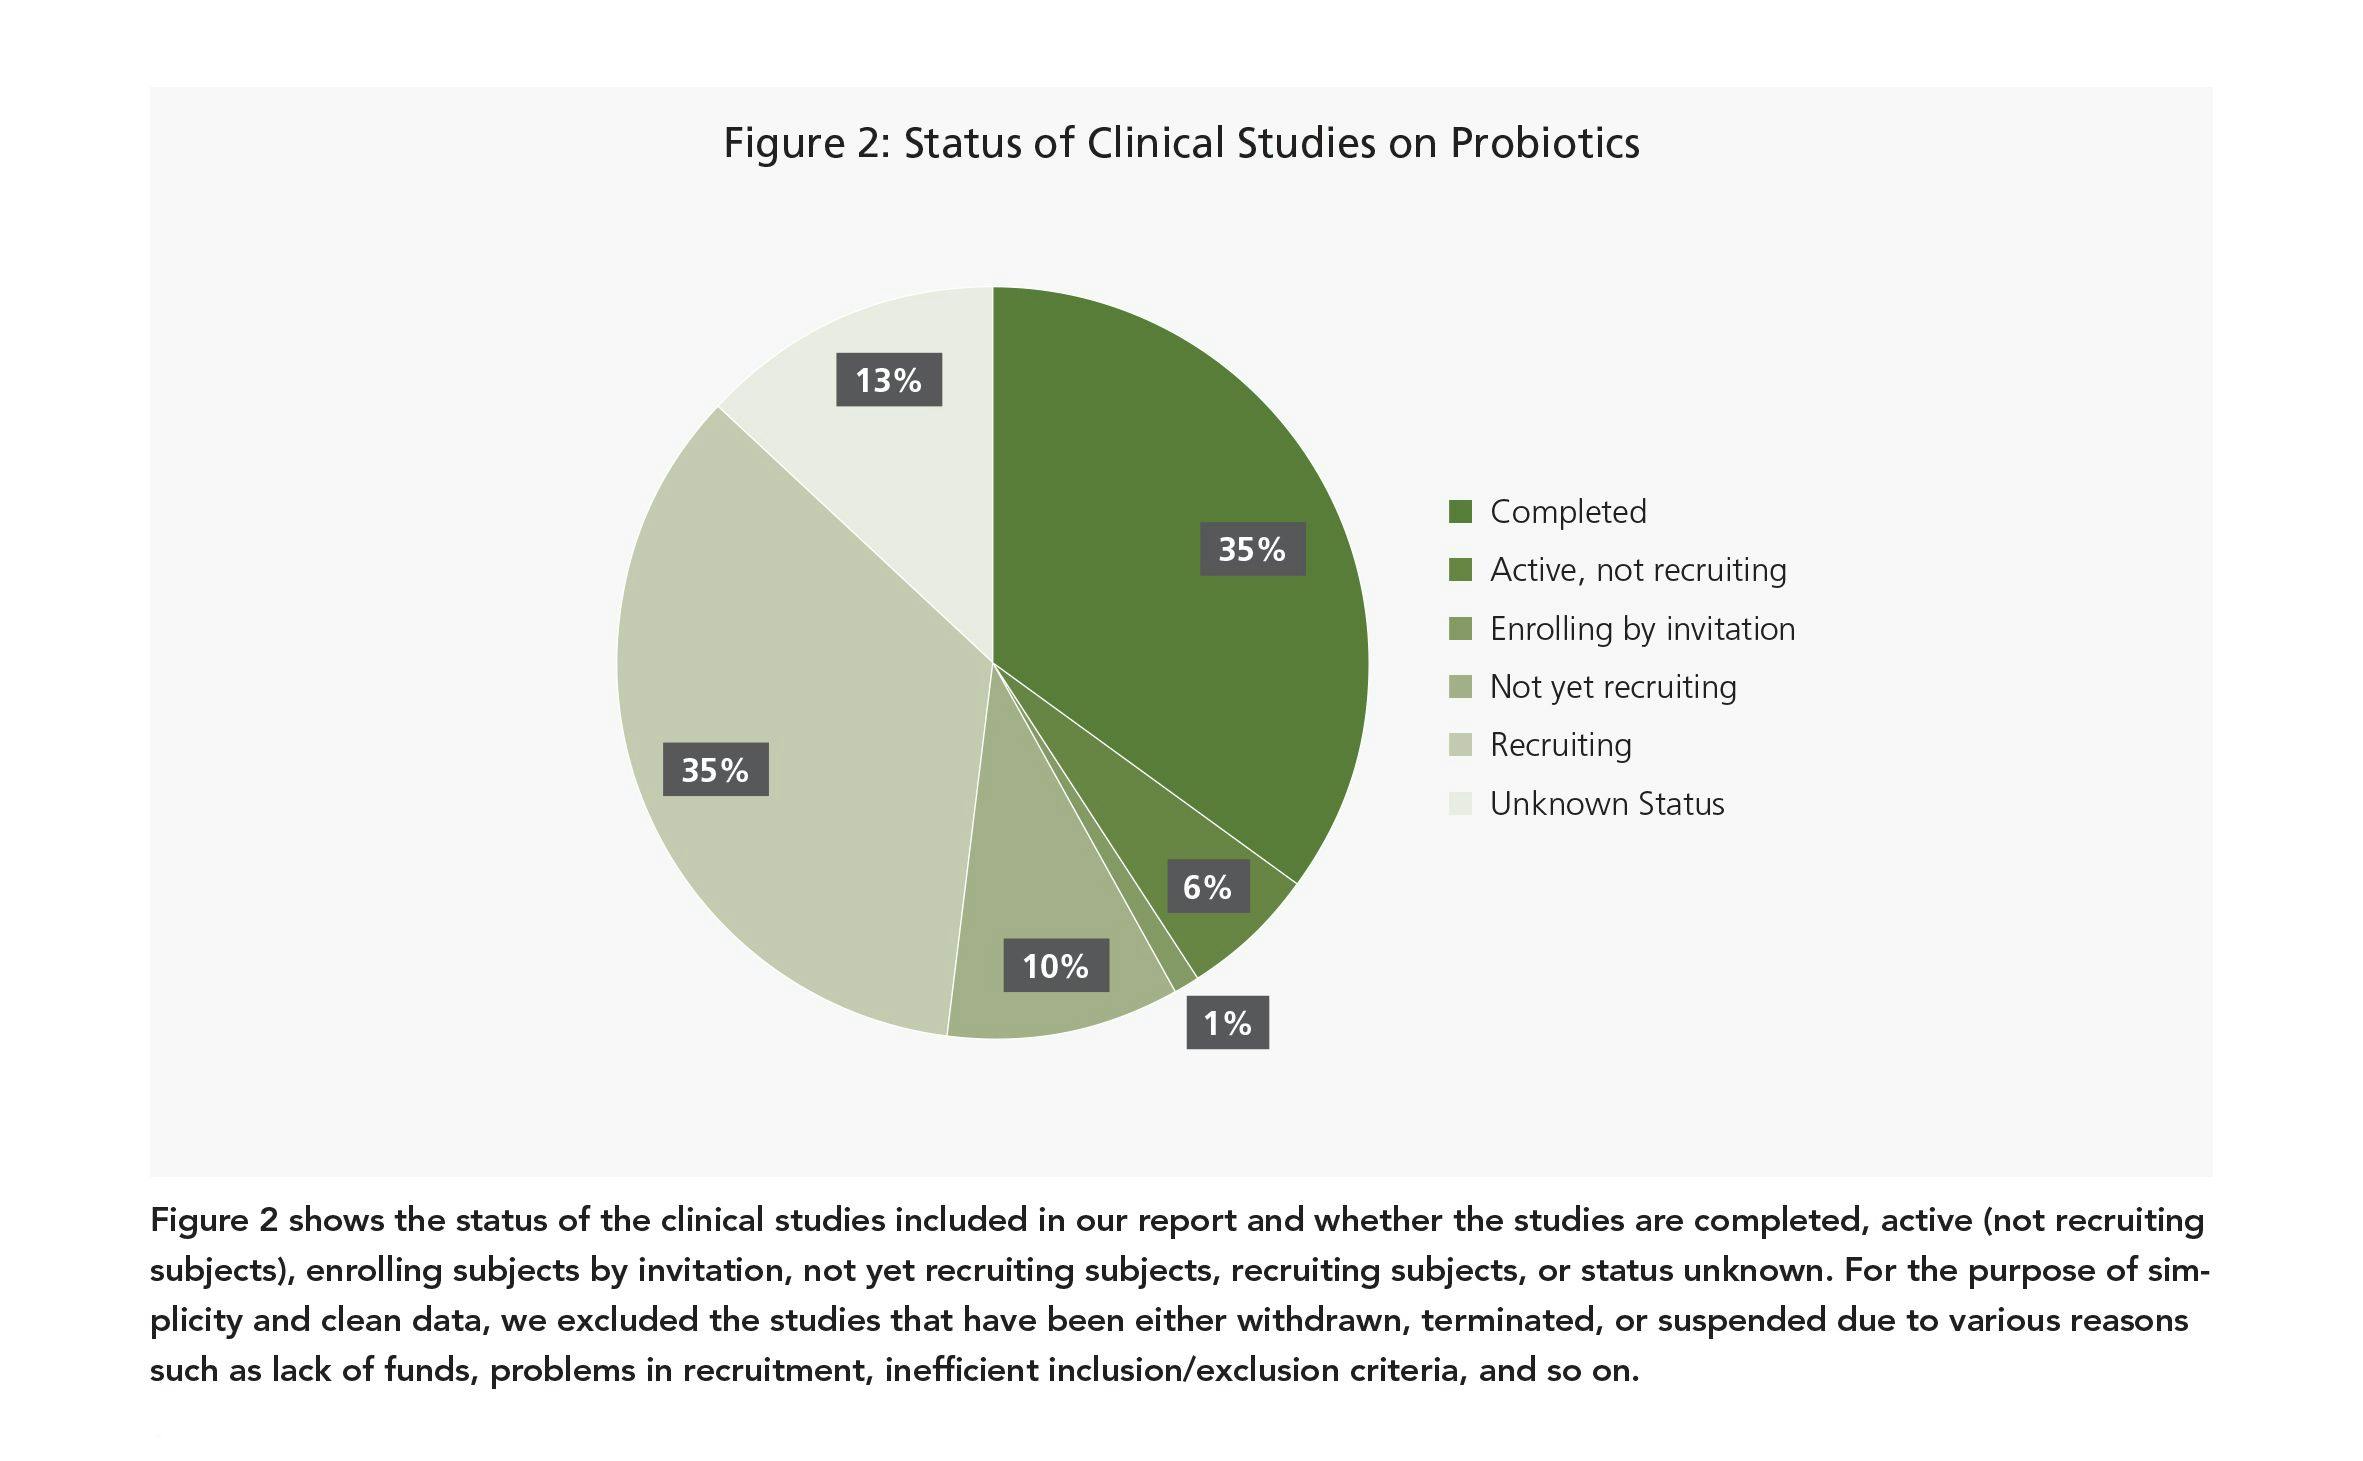 Figure 2 shows the status of the clinical studies included in our report and whether the studies are completed, active (not recruiting subjects), enrolling subjects by invitation, not yet recruiting subjects, recruiting subjects, or status unknown. For the purpose of simplicity and clean data, we excluded the studies that have been either withdrawn, terminated, or suspended due to various reasons such as lack of funds, problems in recruitment, inefficient inclusion/exclusion criteria, and so on.